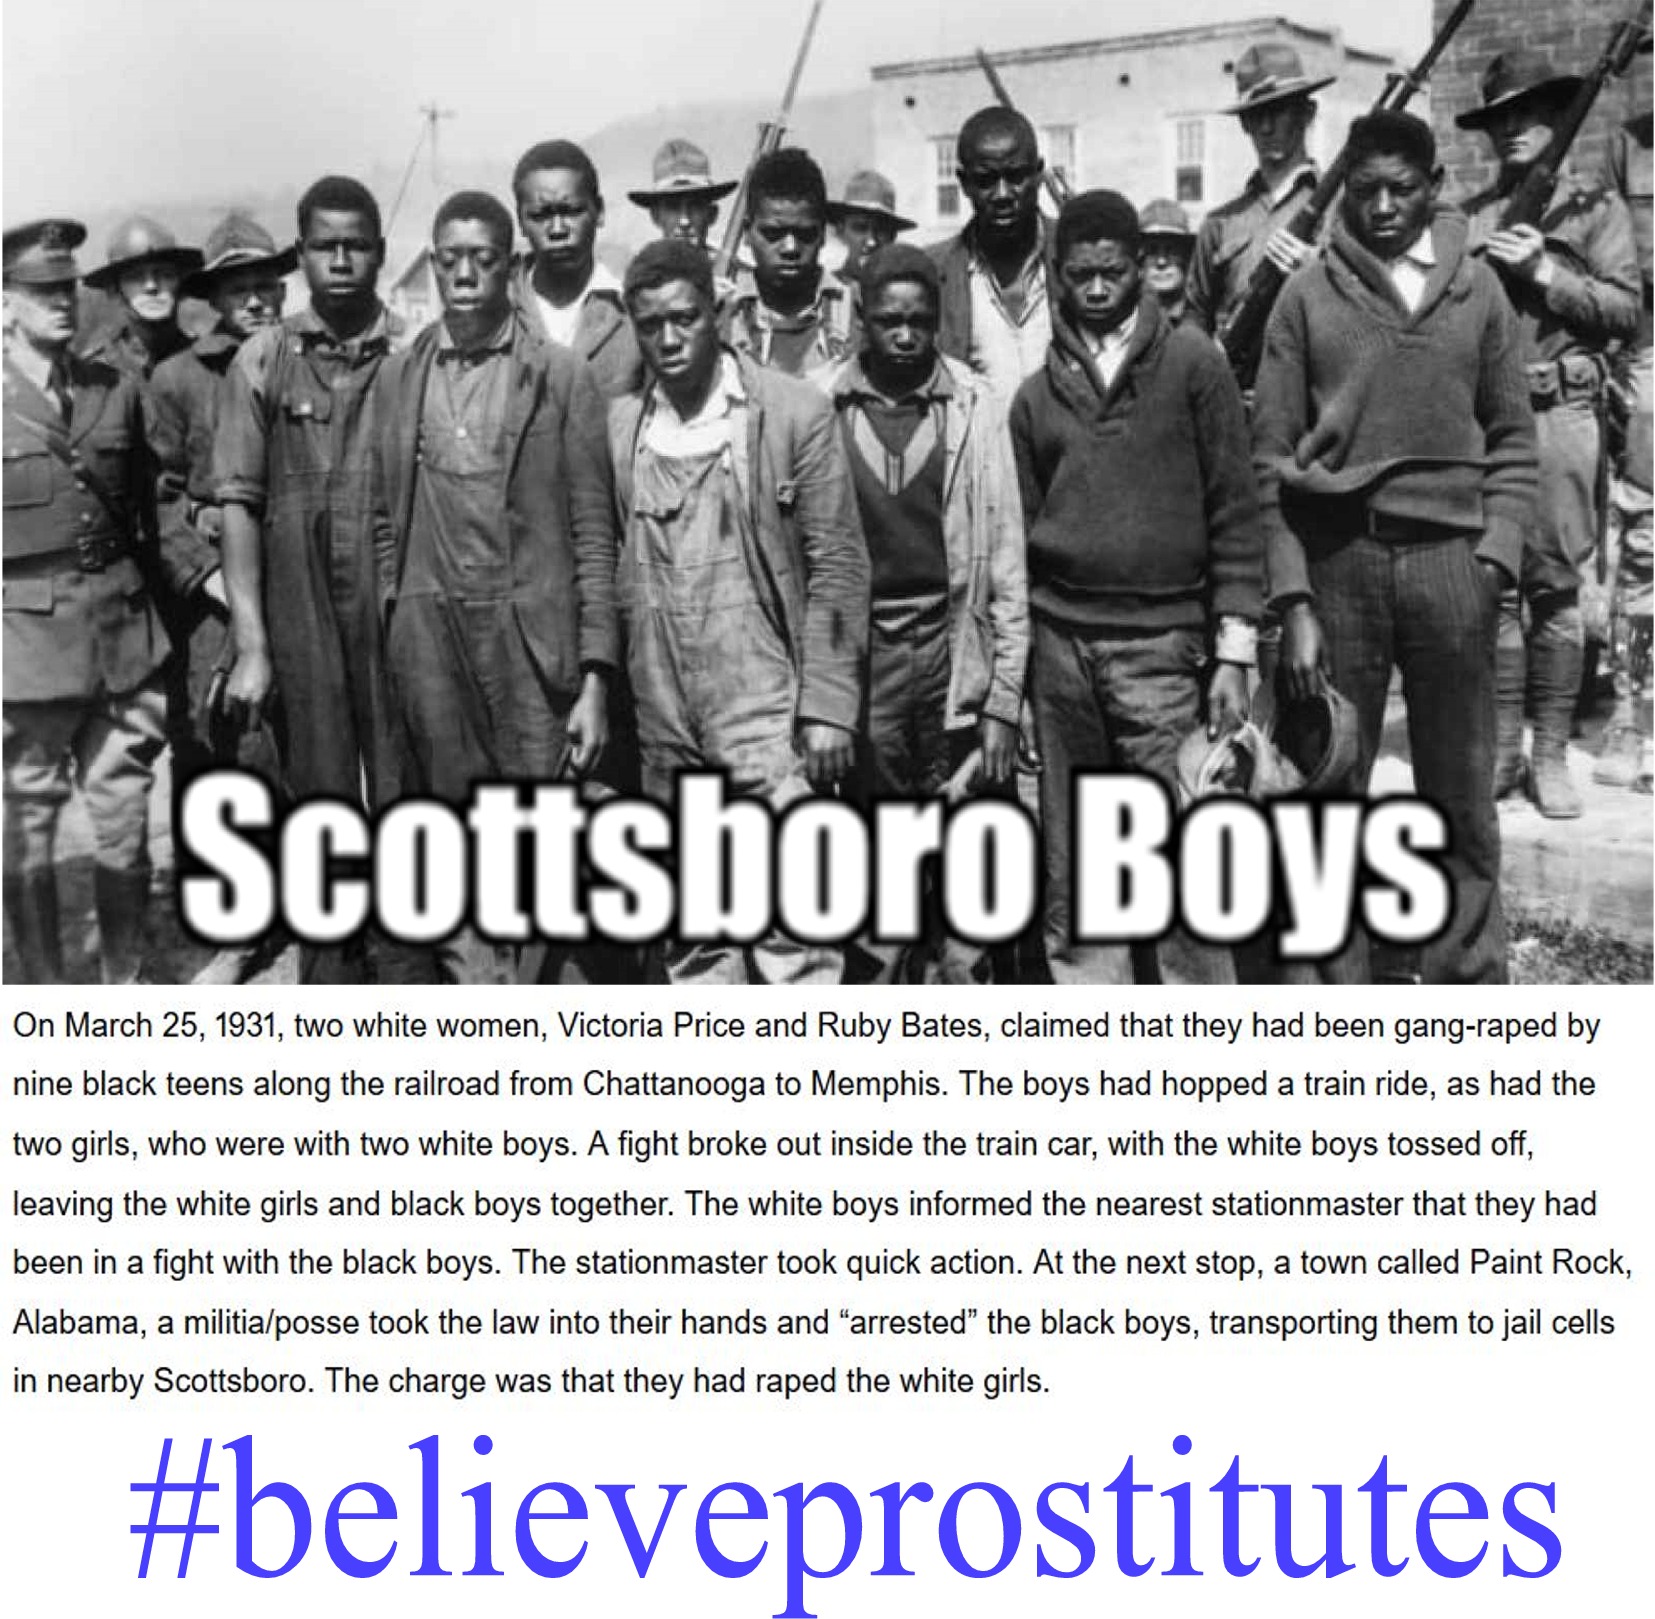 scottsboro boys - Scottsboro Boys On , two white women, Victoria Price and Ruby Bates, claimed that they had been gangraped by nine black teens along the railroad from Chattanooga to Memphis. The boys had hopped a train ride, as had the two girls, who wer